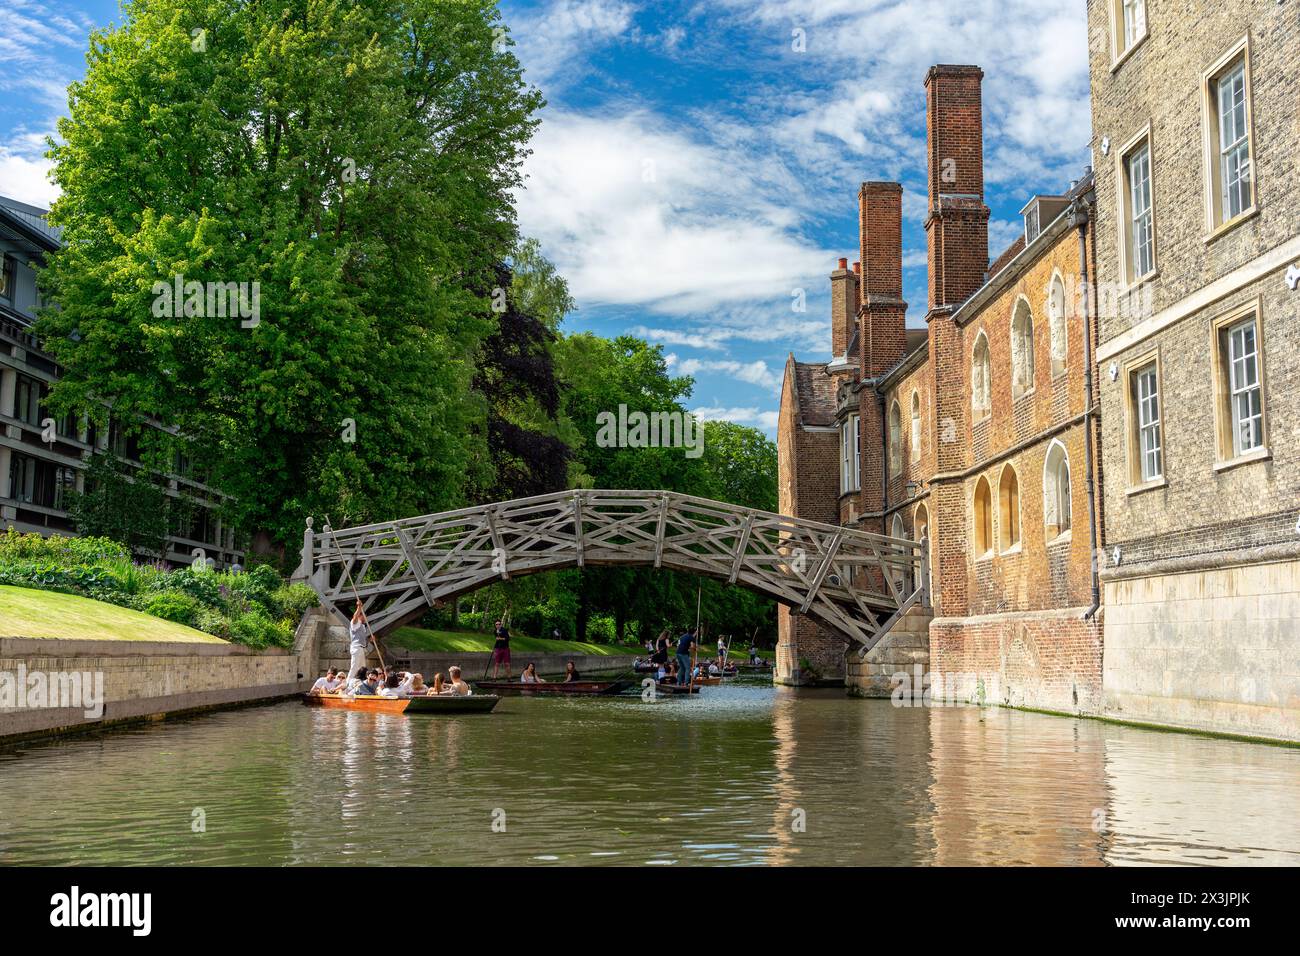 Cambridge, England - June 6th 2019 - Canals on a sunny day Stock Photo